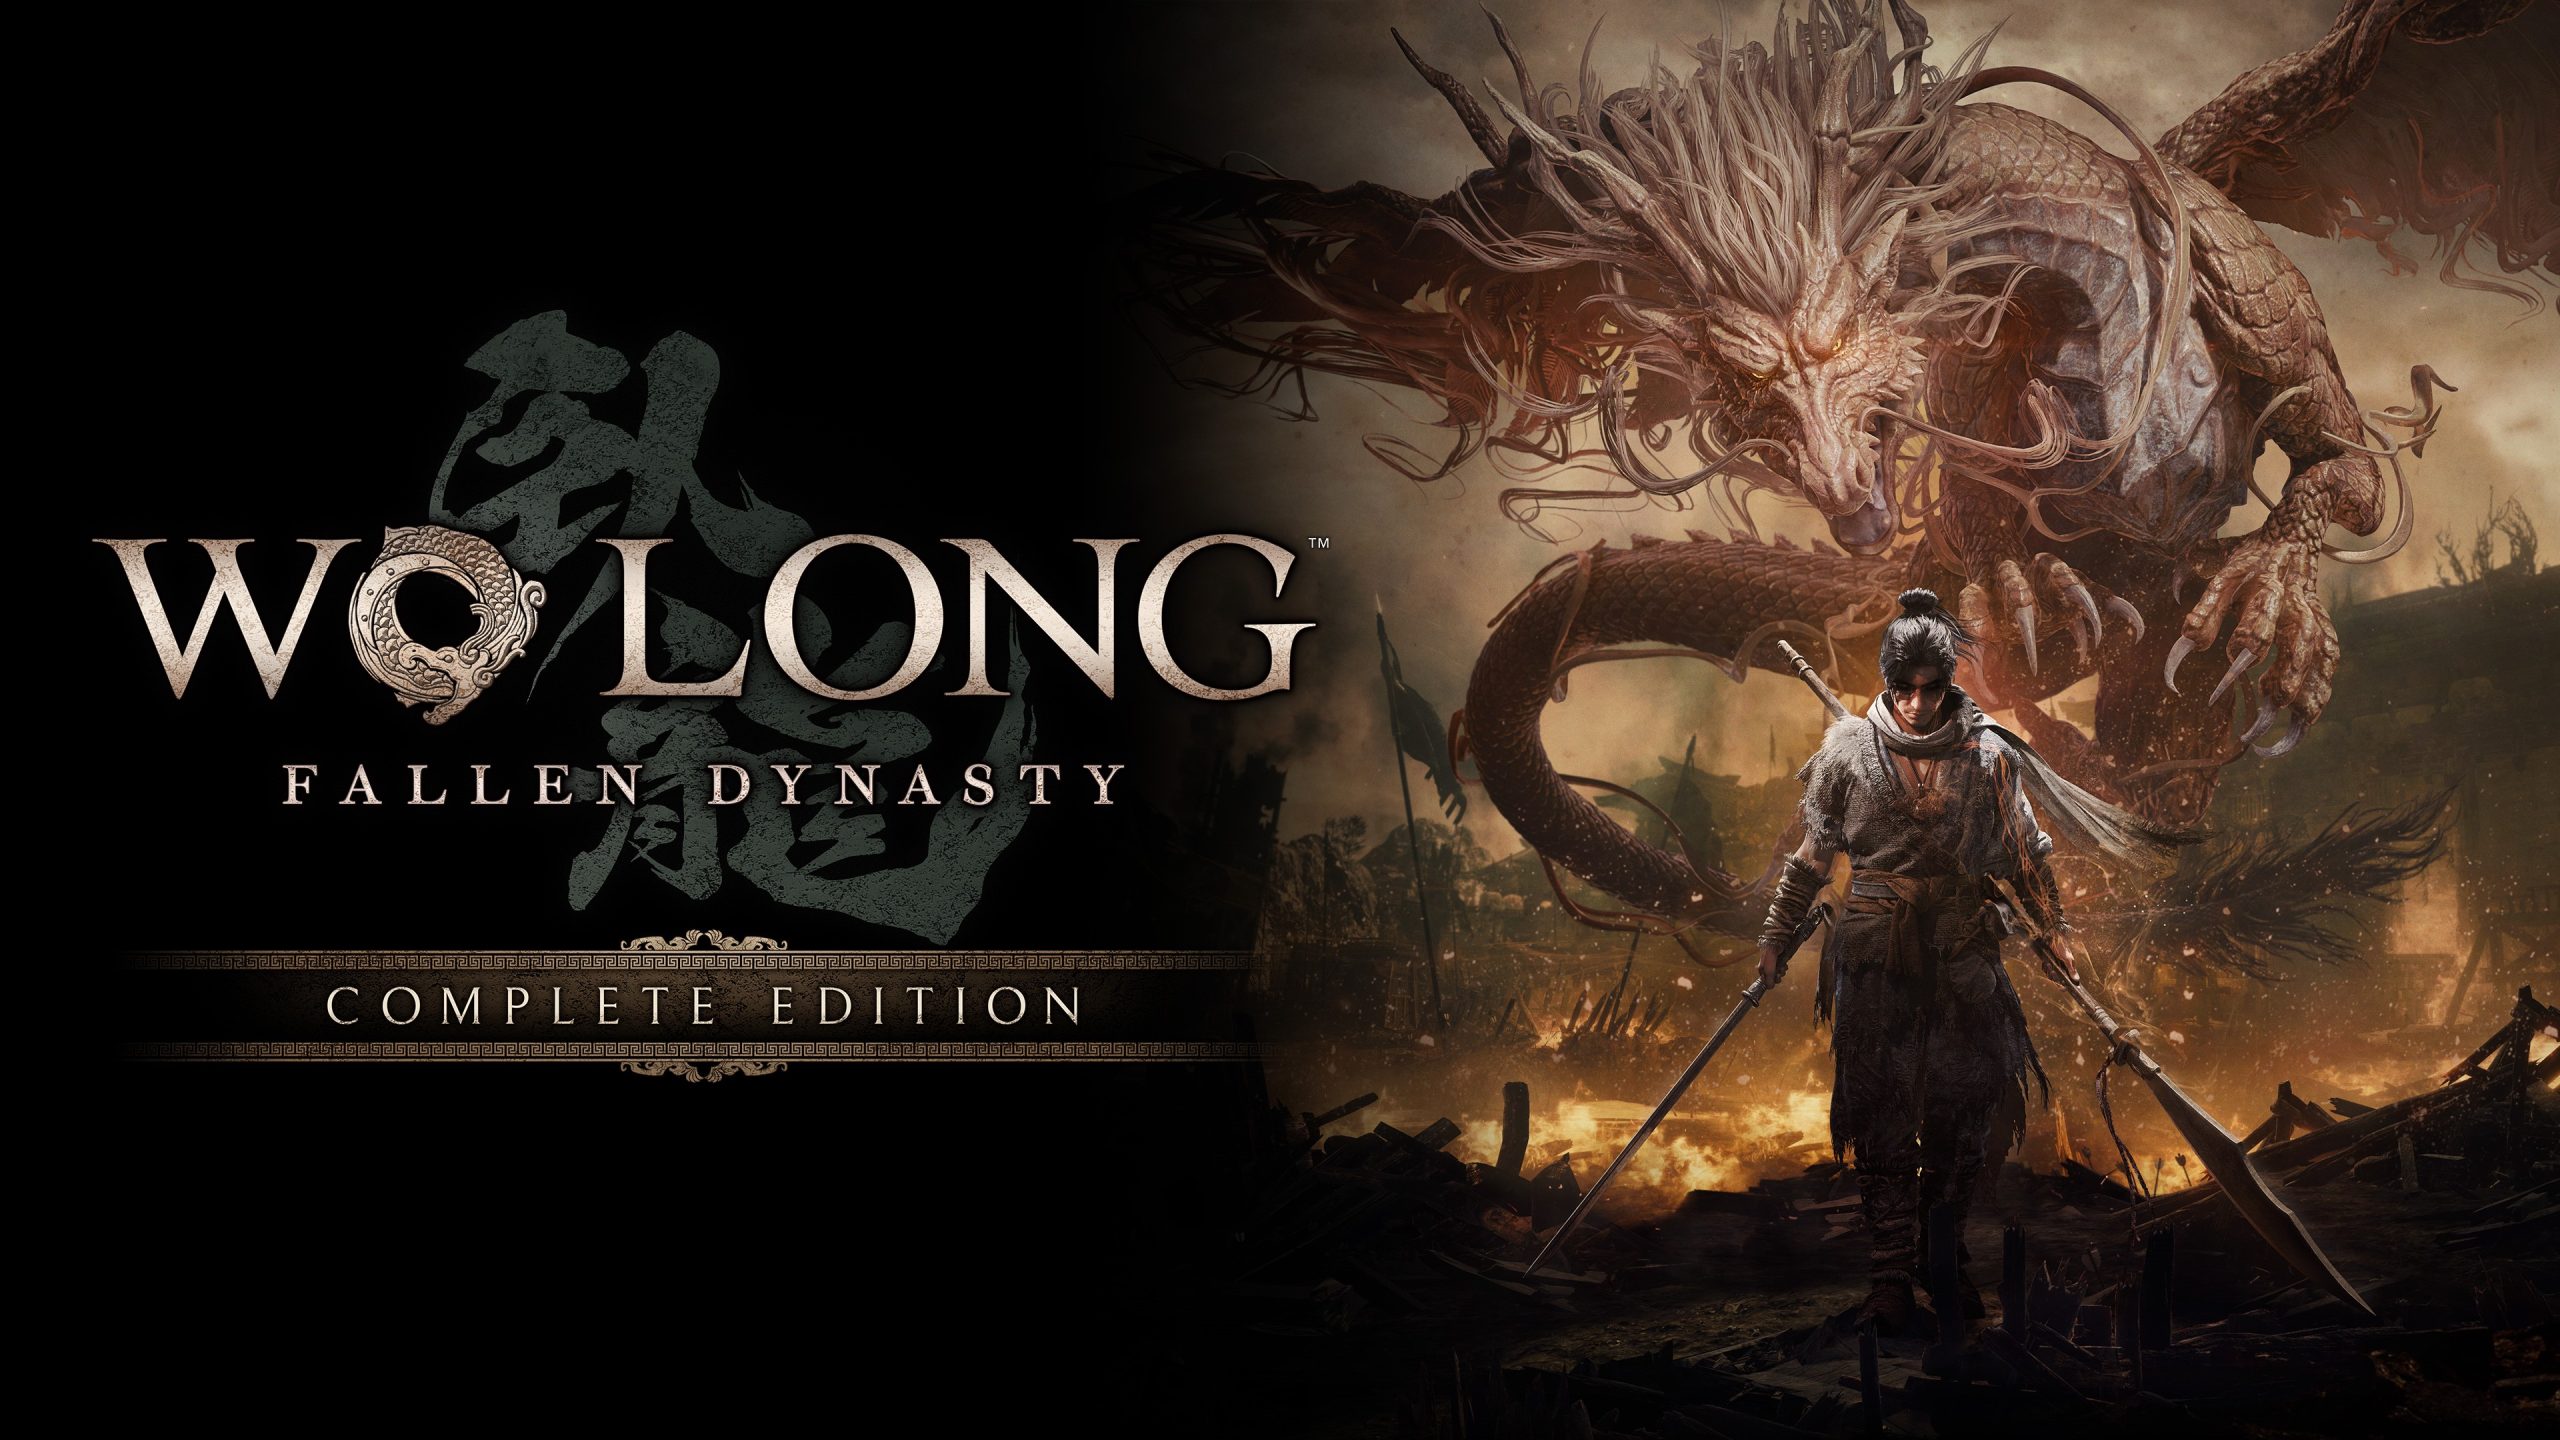 The (wide) key art for Wo Long: Fallen Dynasty Complete Edition.